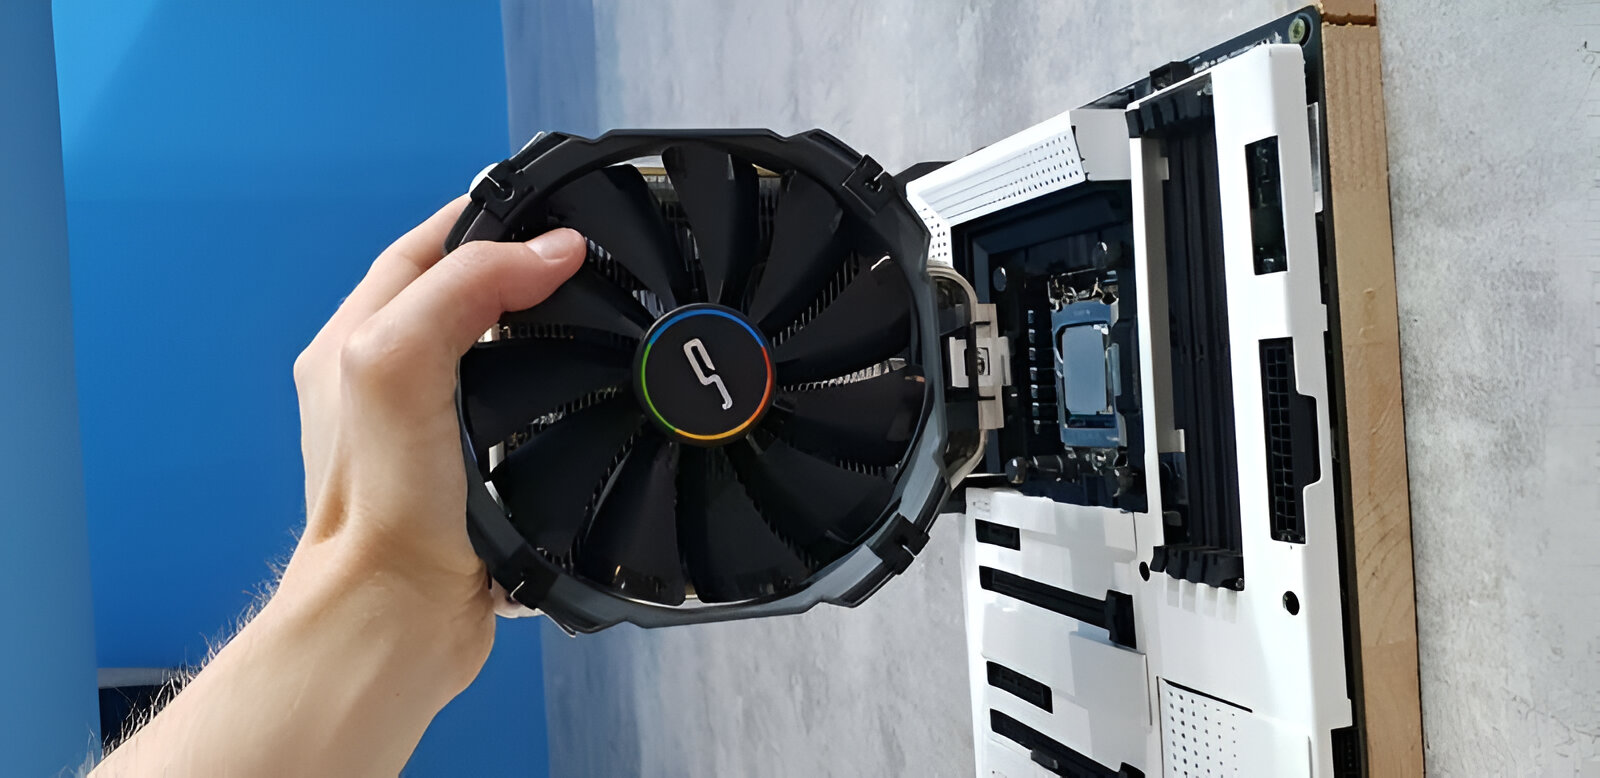 How To Attach CPU Cooler